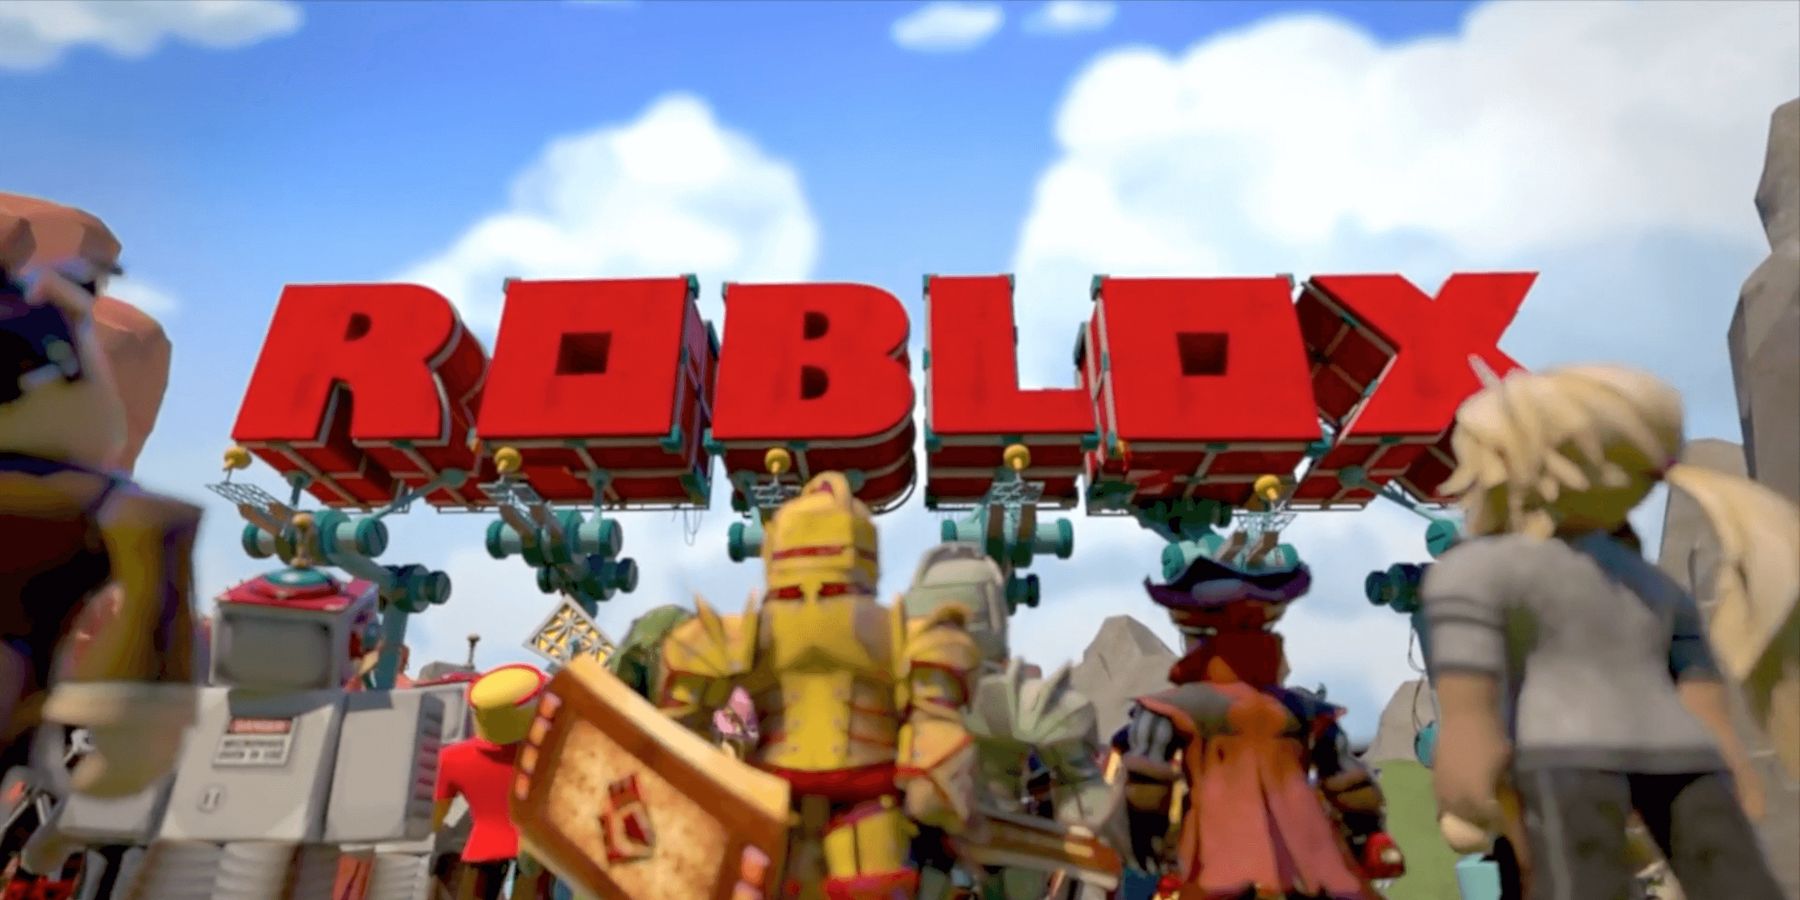 Roblox's PlayStation release date has been confirmed